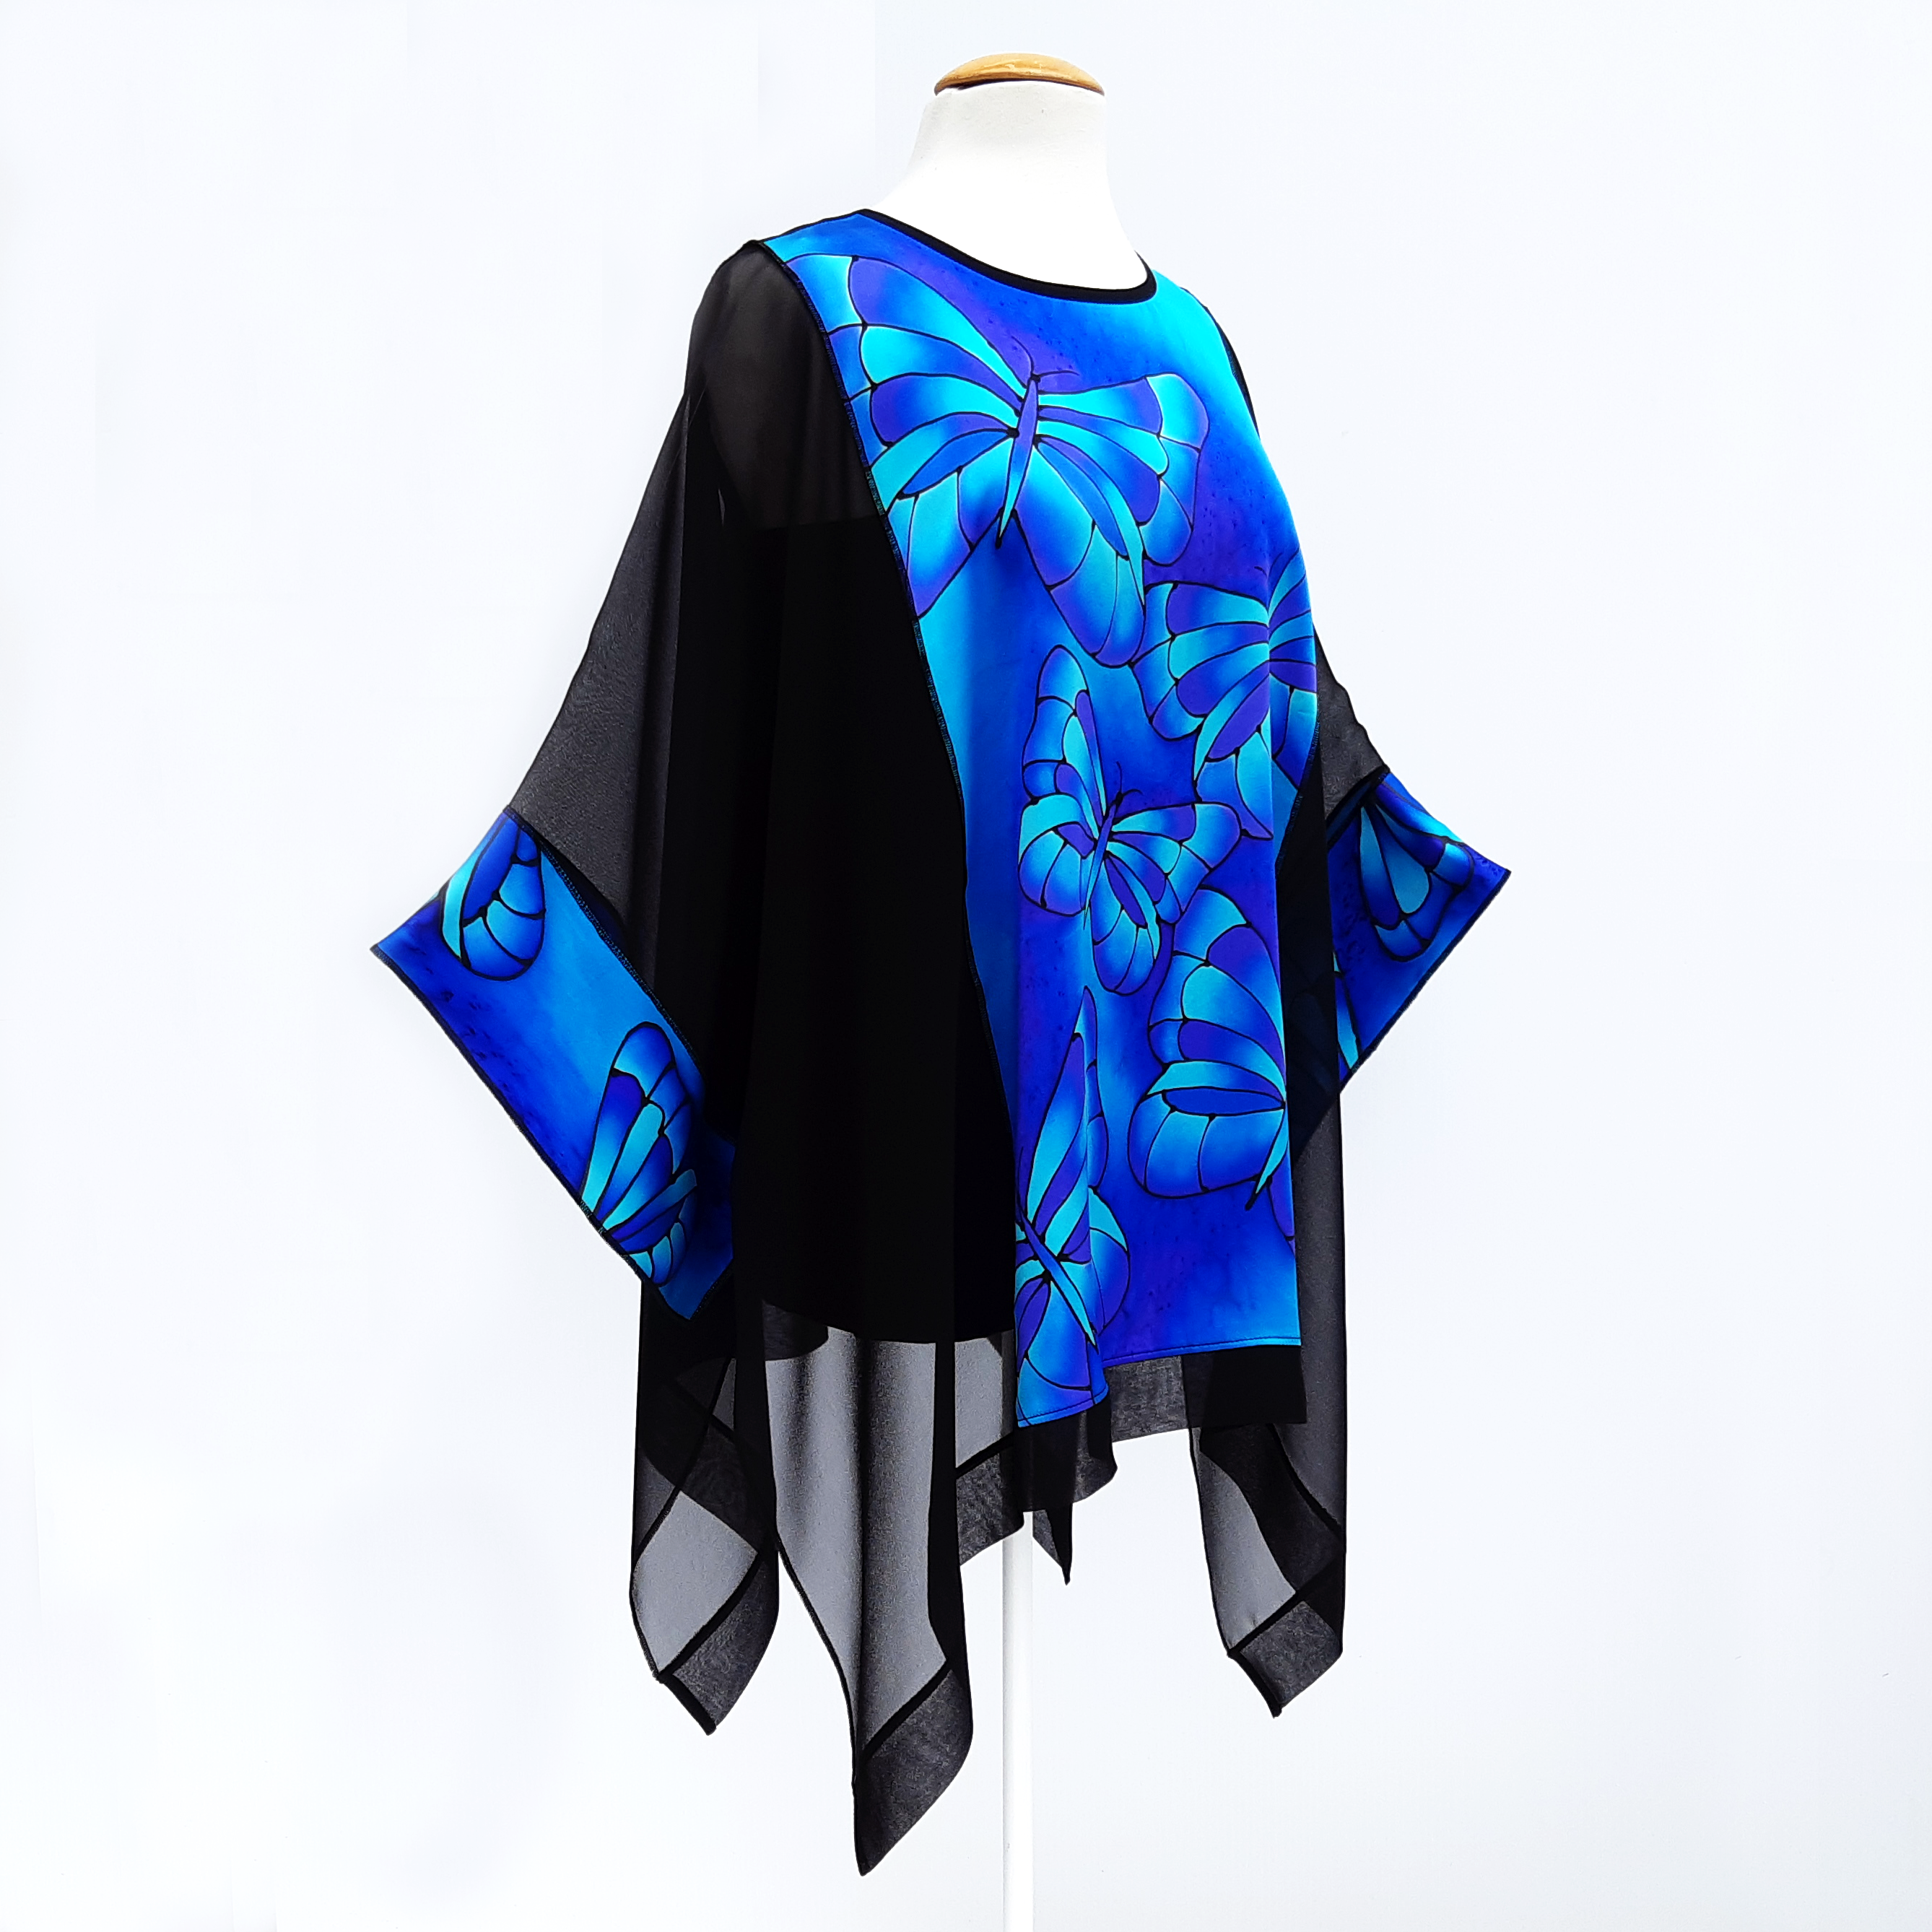 Plus size caftan top black silk for weddings and cruise wear made in Canada